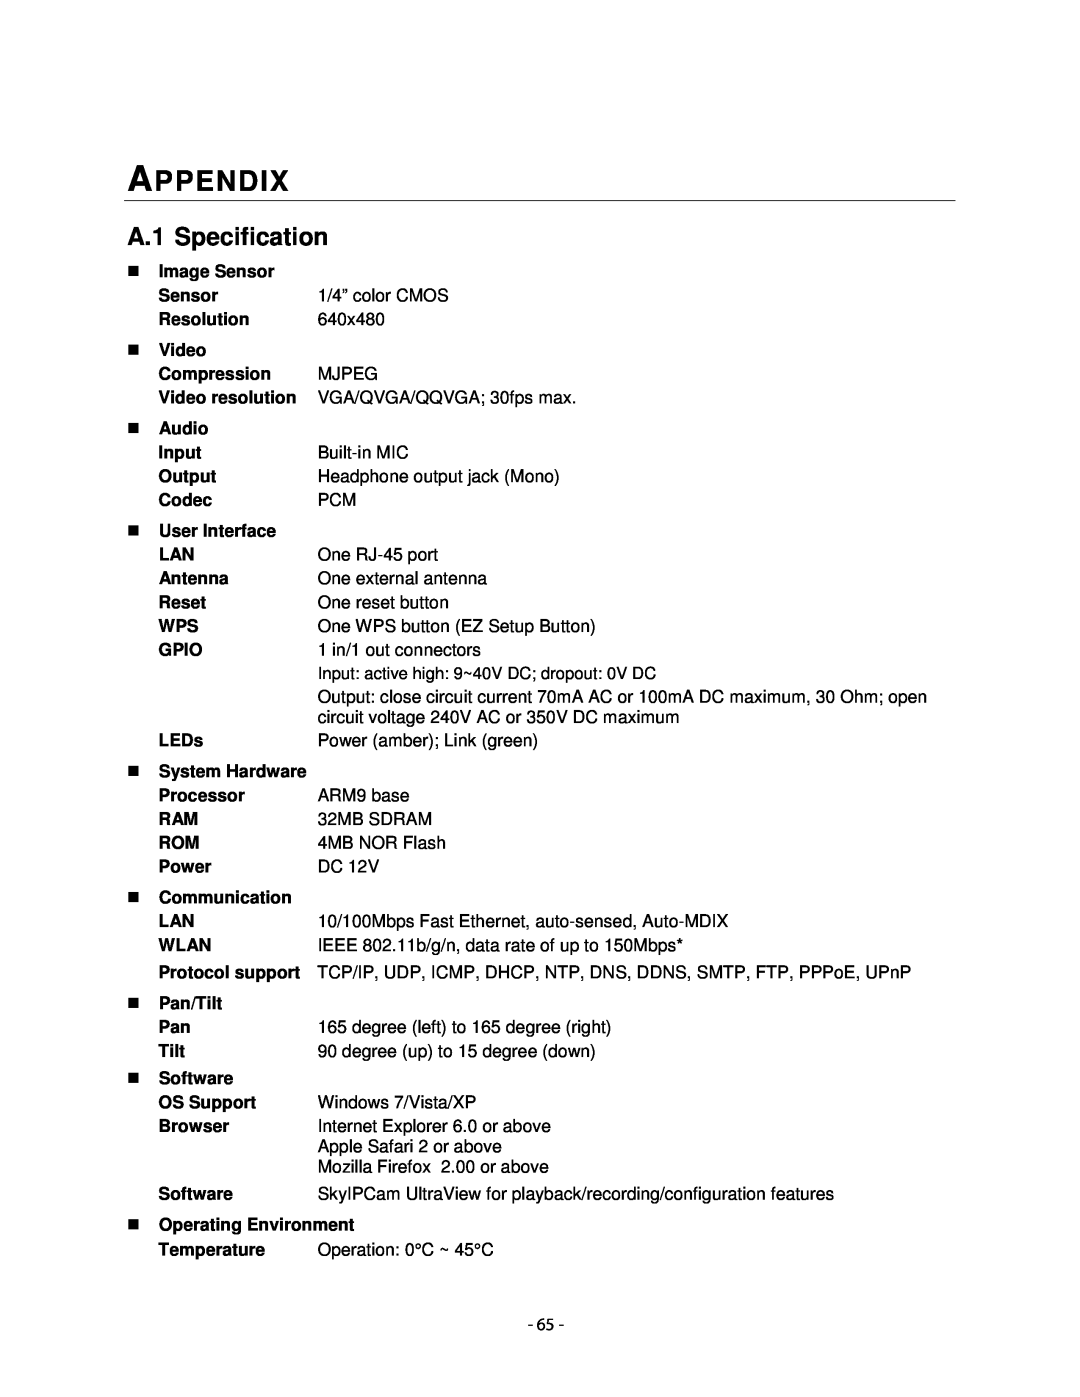 Airlink101 AICN1747W user manual Appendix, A.1 Specification 